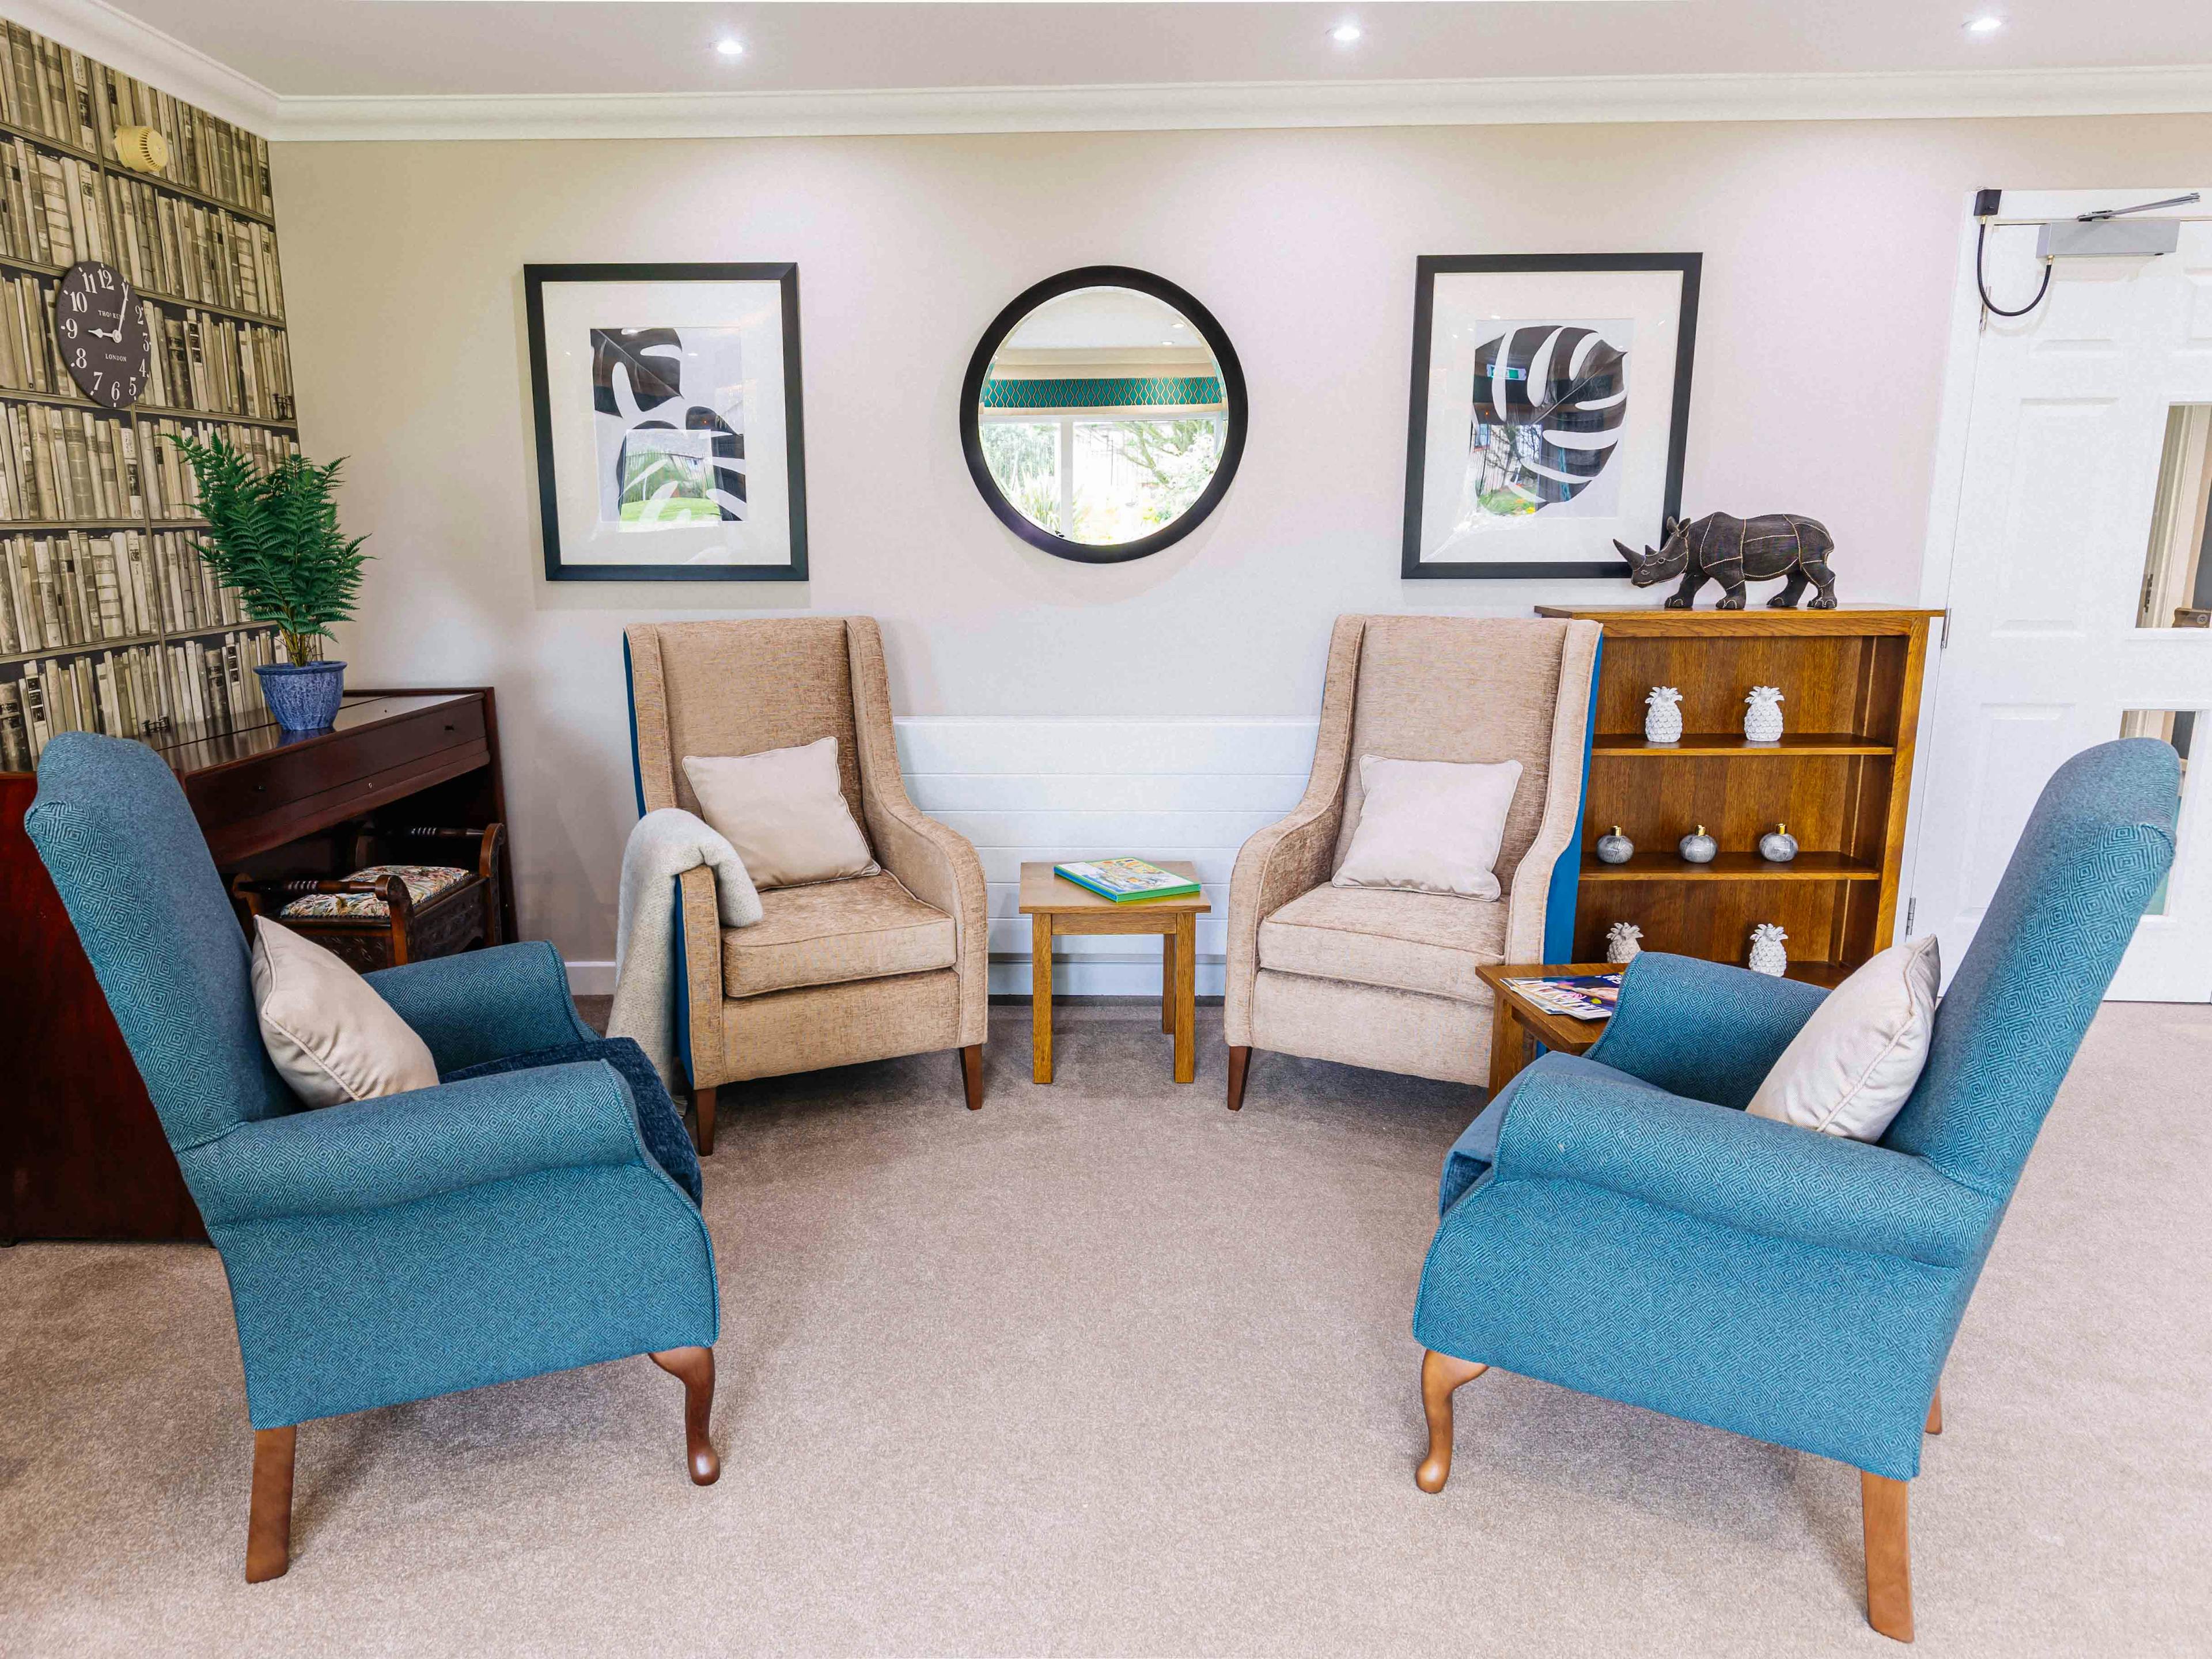 Communal Area at Kirkburn Court Care Home in Peterhead, Aberdeenshire